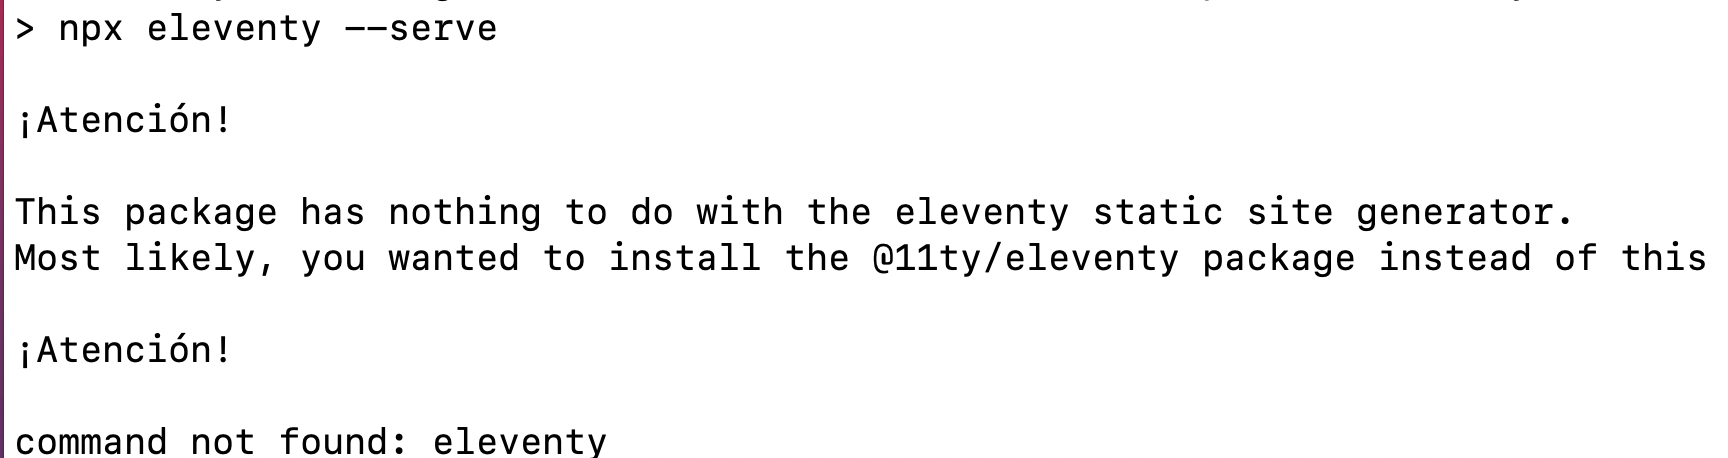 a screenshot of console output from the command 'npx eleventy --serve', with a message below that reads 'Atencion! This package has nothing to do with the eleventy static site generator. Most likely, you wanted to install the @11ty/eleventy package instead of this. Atencion! command not found: eleventy'